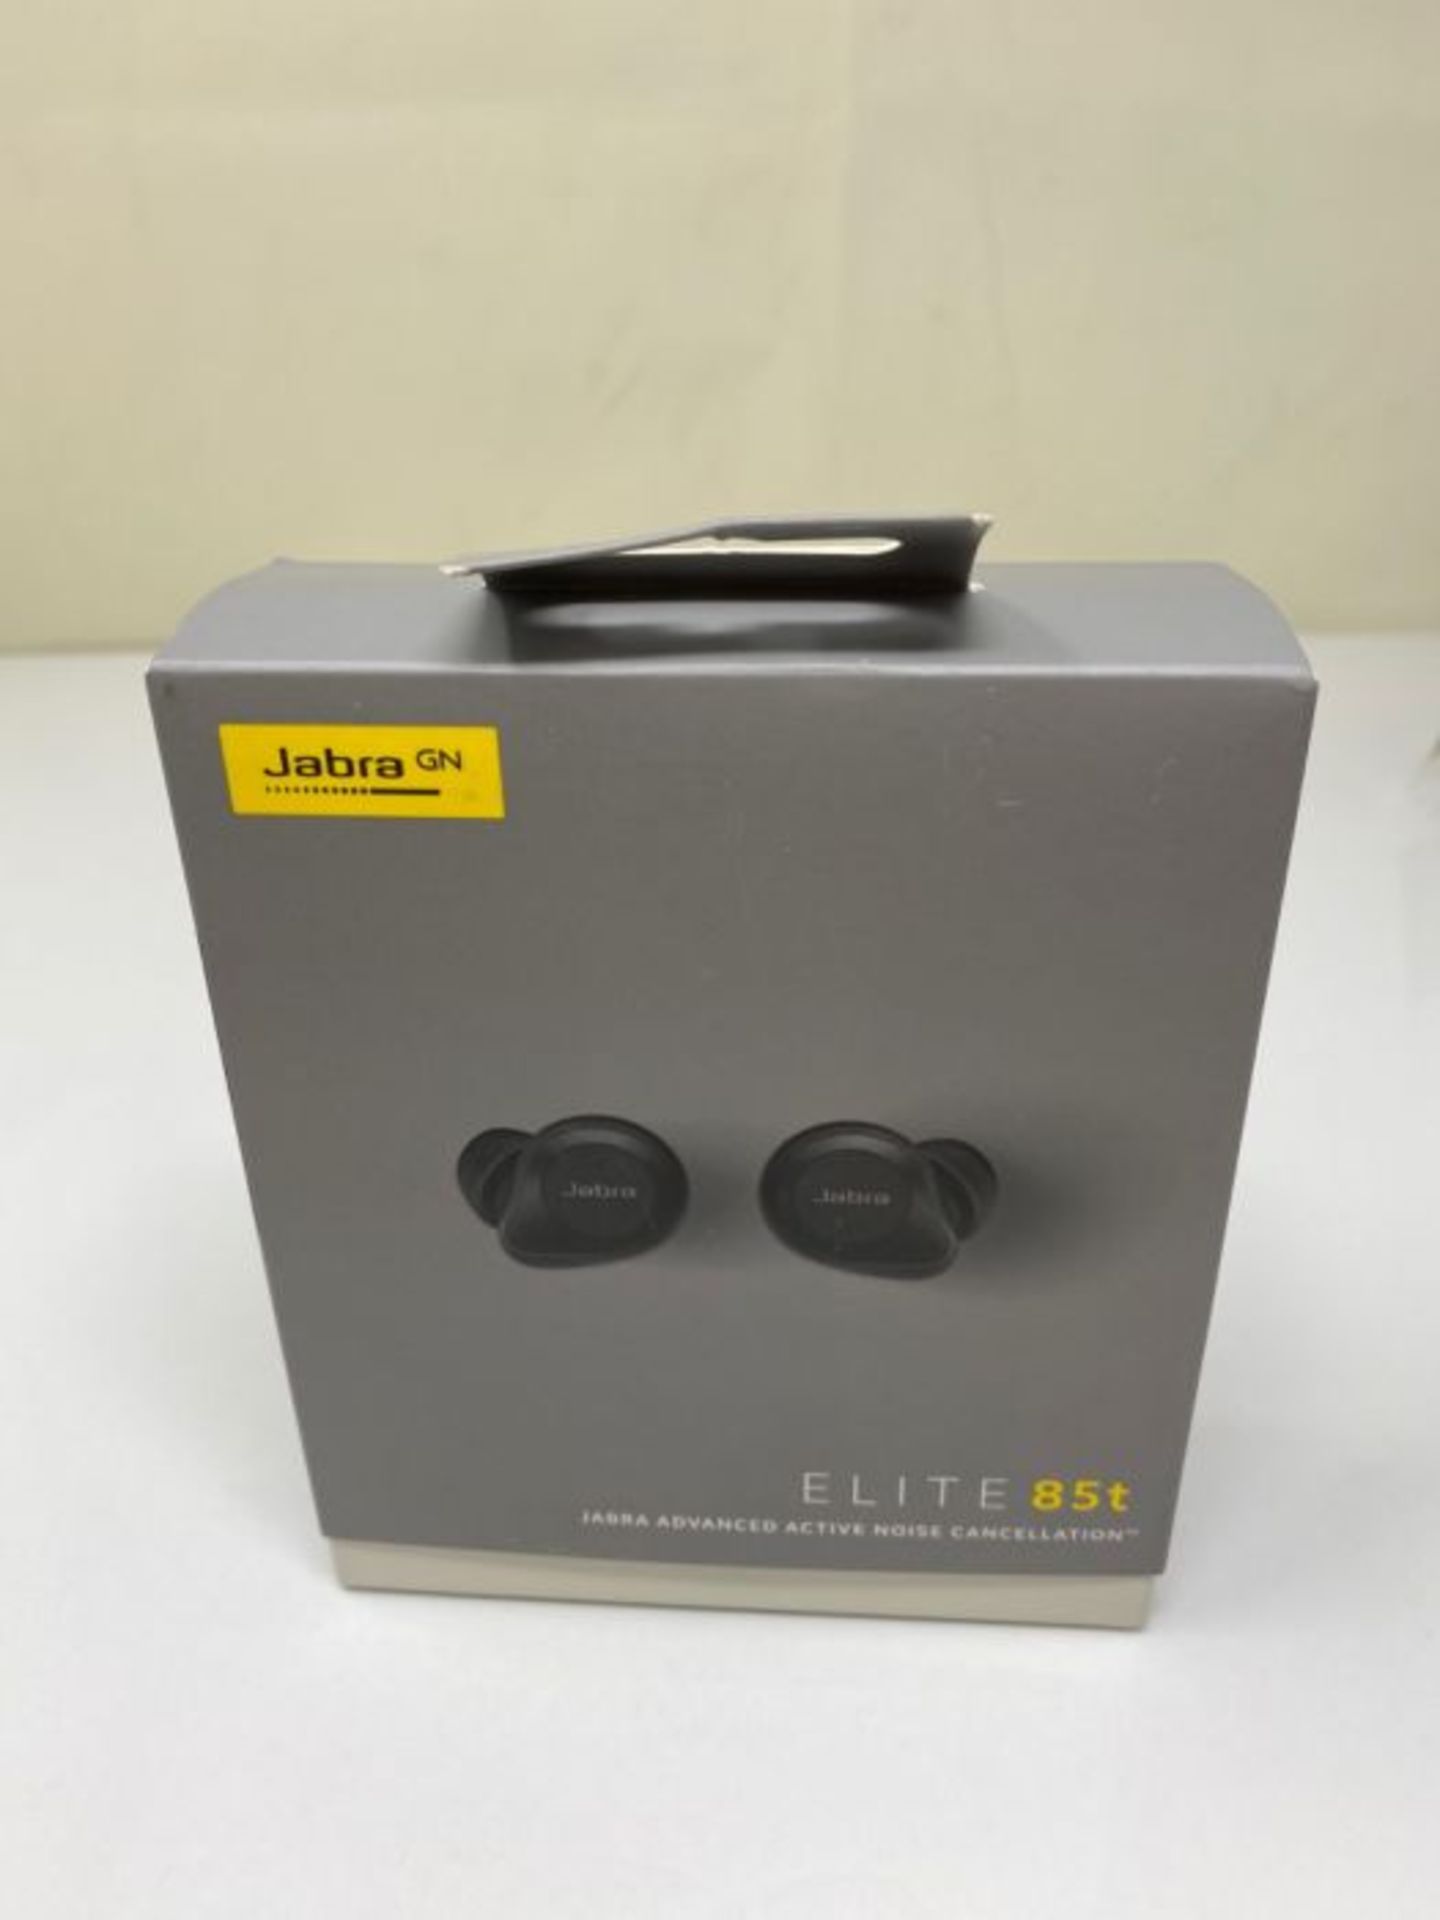 RRP £223.00 Jabra Elite 85t True Wireless Earbuds - Jabra Advanced Active Noise Cancellation with - Image 2 of 3